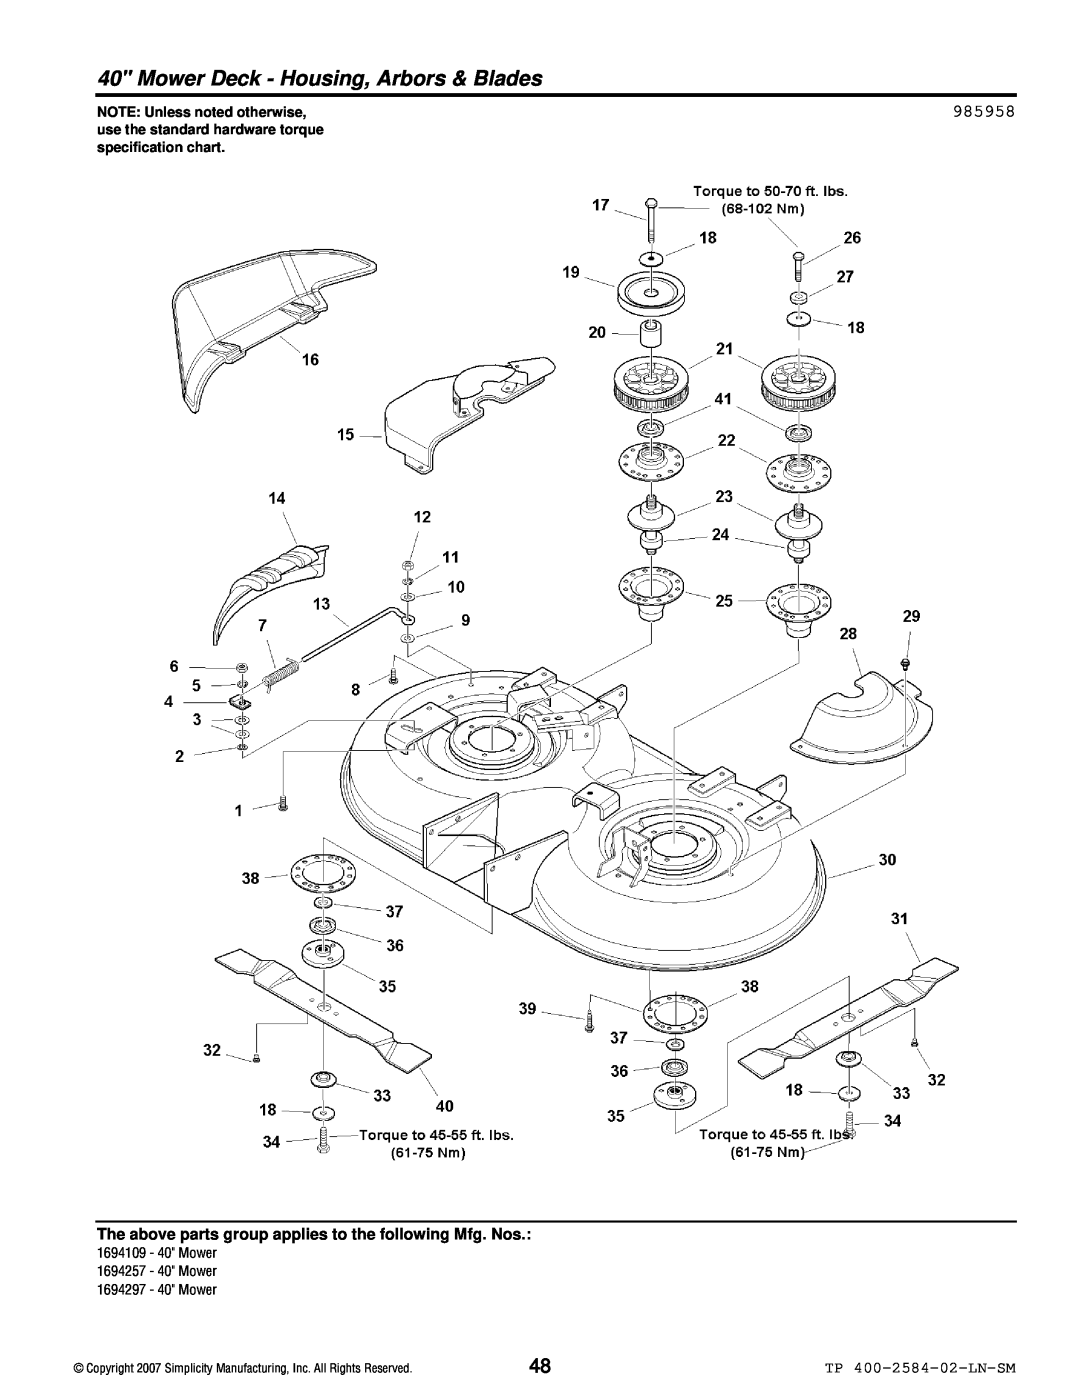 Simplicity Lancer / 4400 Mower Deck - Housing, Arbors & Blades, 985958, TP 400-2584-02-LN-SM, NOTE: Unless noted otherwise 